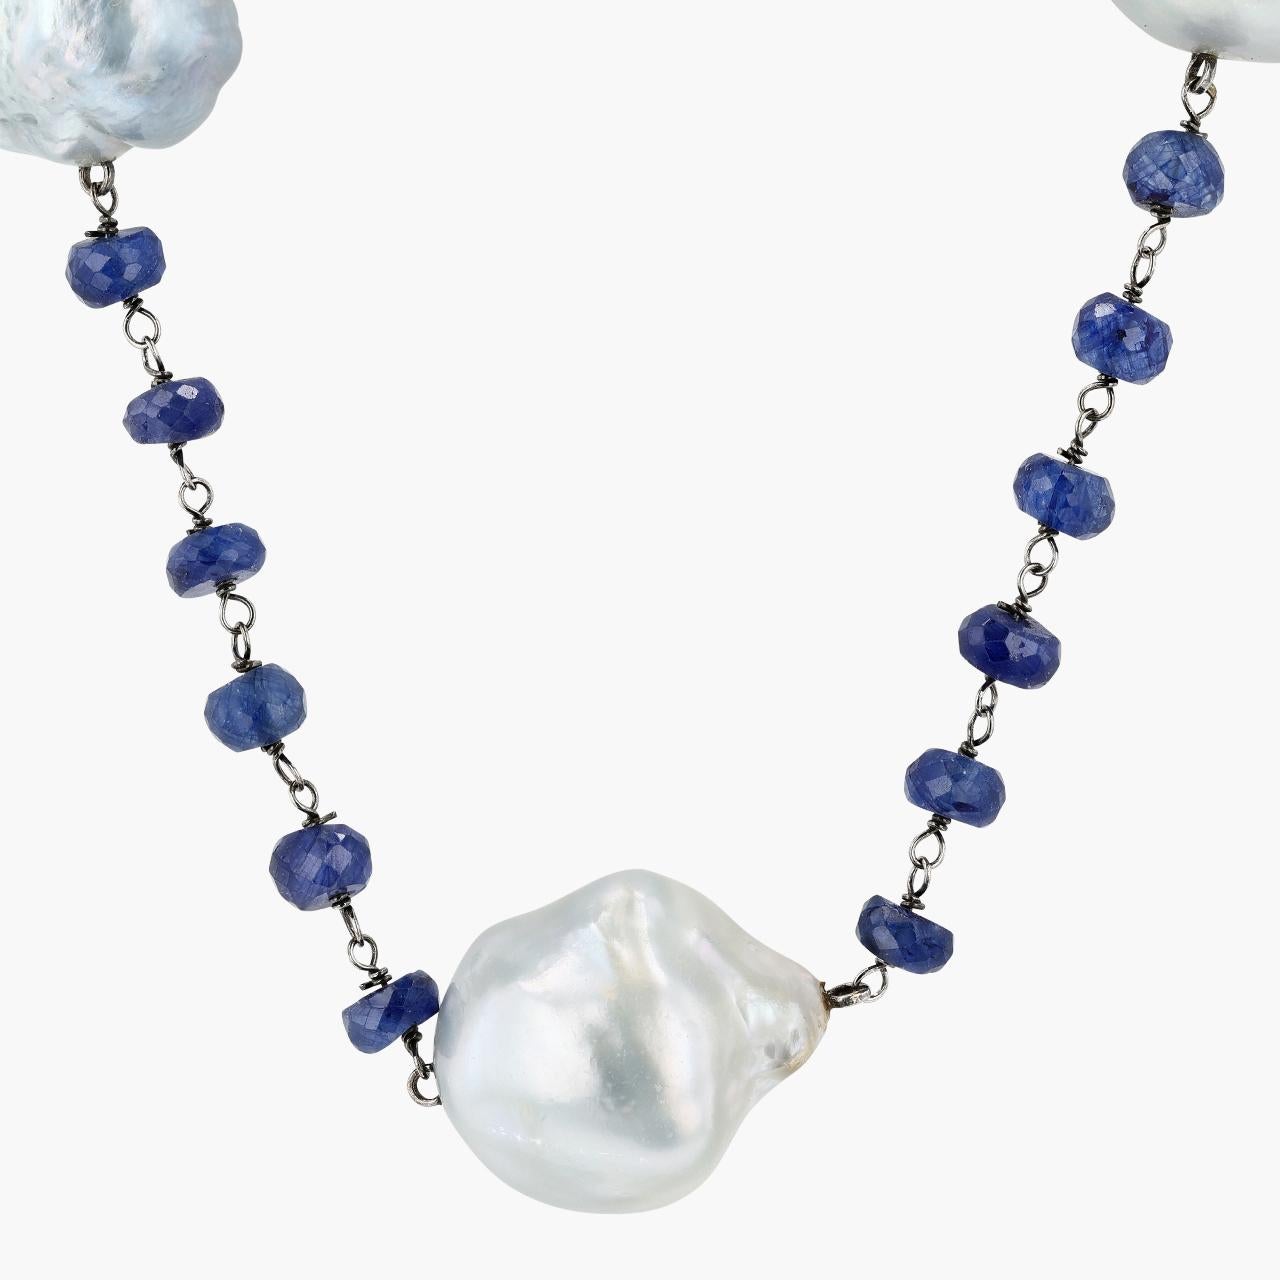 18kt White Gold, South Sea Baroque Pearl and Sapphire Rondelle Necklace by Yvel. The necklace features 11 South Sea Baroque Pearls and approximately 50ctw of Sapphire Faceted Beads. The gemstones are strung together with white gold wire. The